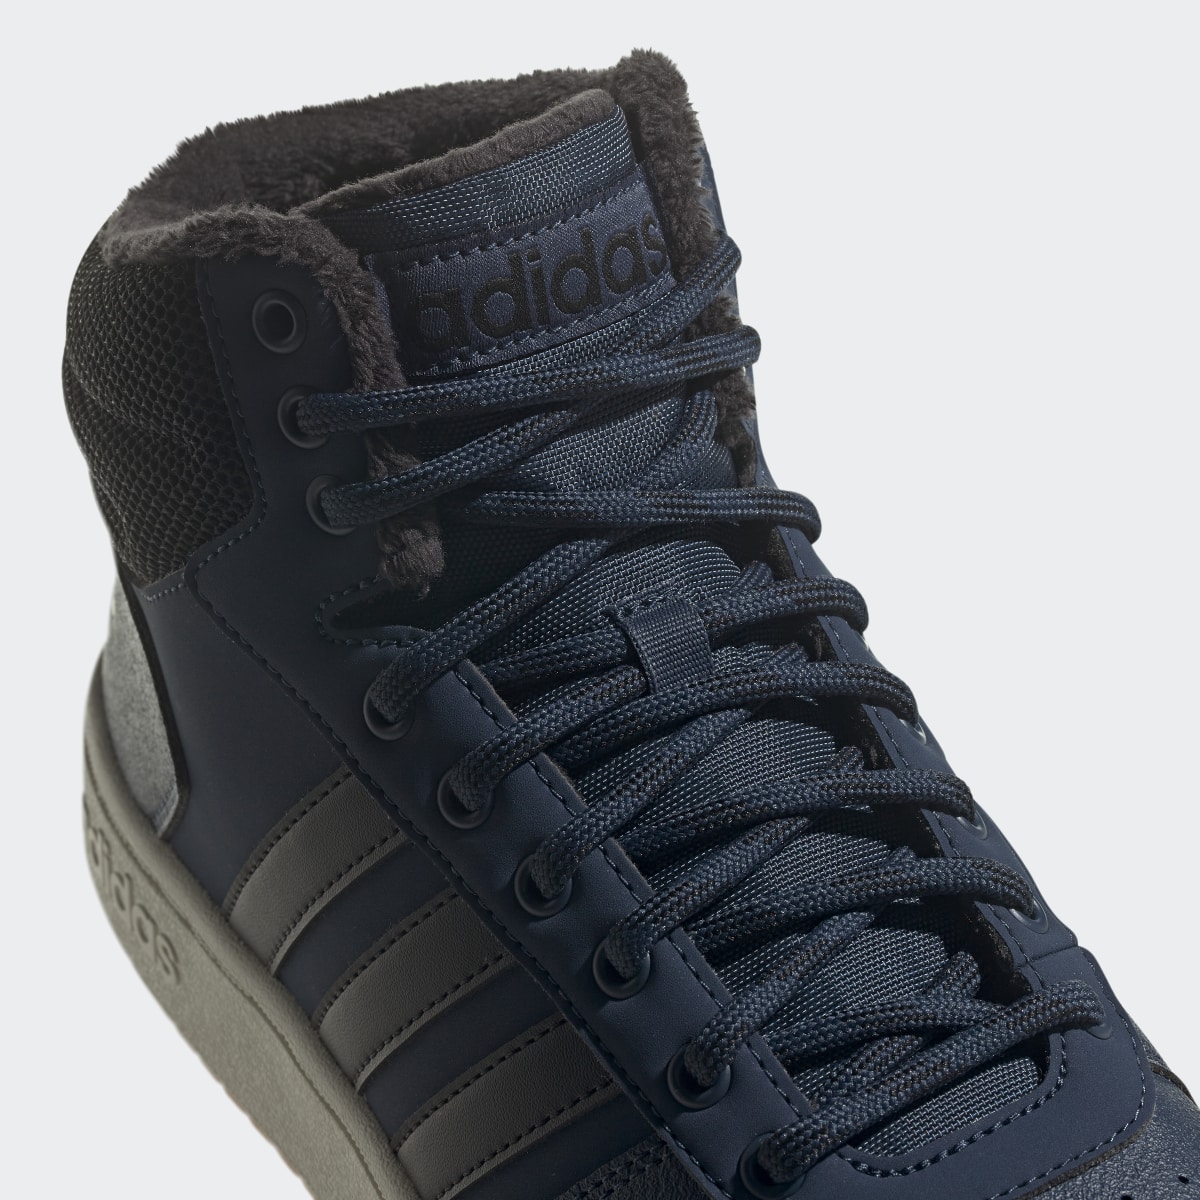 Adidas Hoops 2.0 Mid Shoes. 8